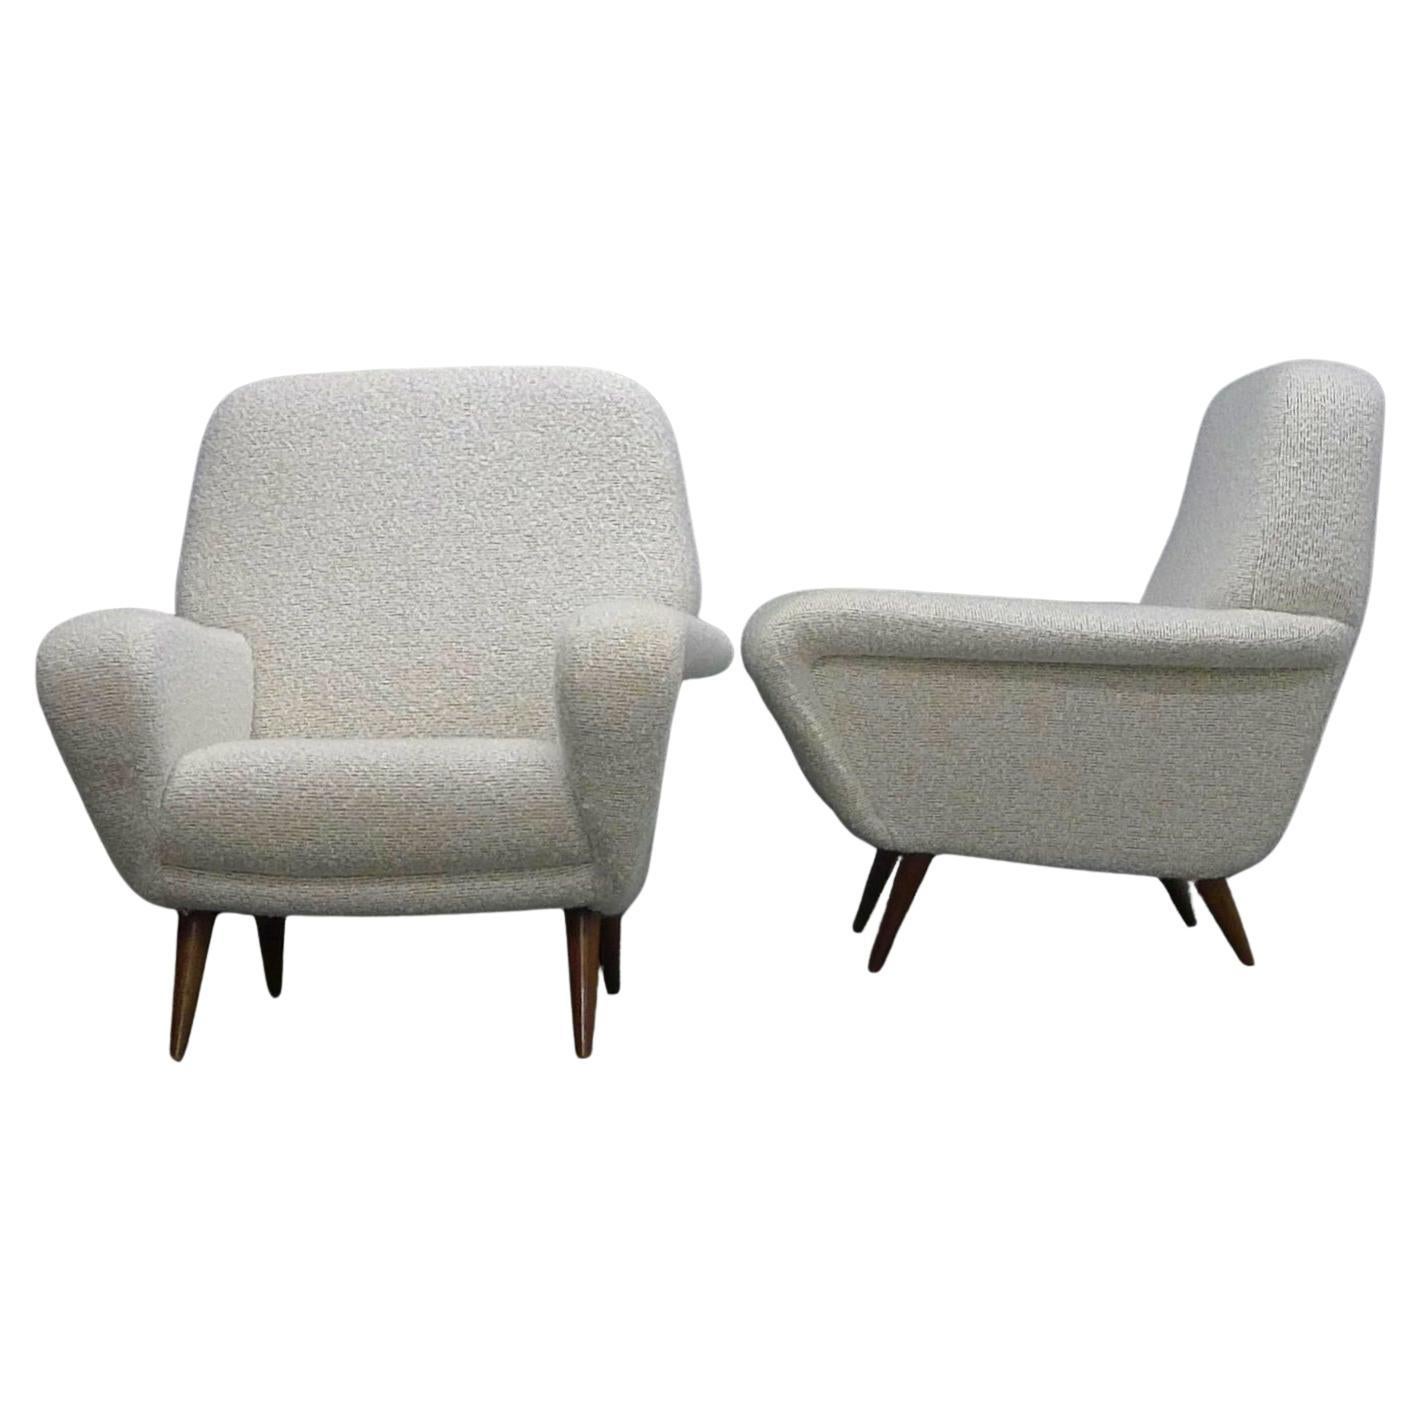 Gianfranco Frattini, Pair of Upholstered Armchairs, model 830, by Cassina, 1950s For Sale